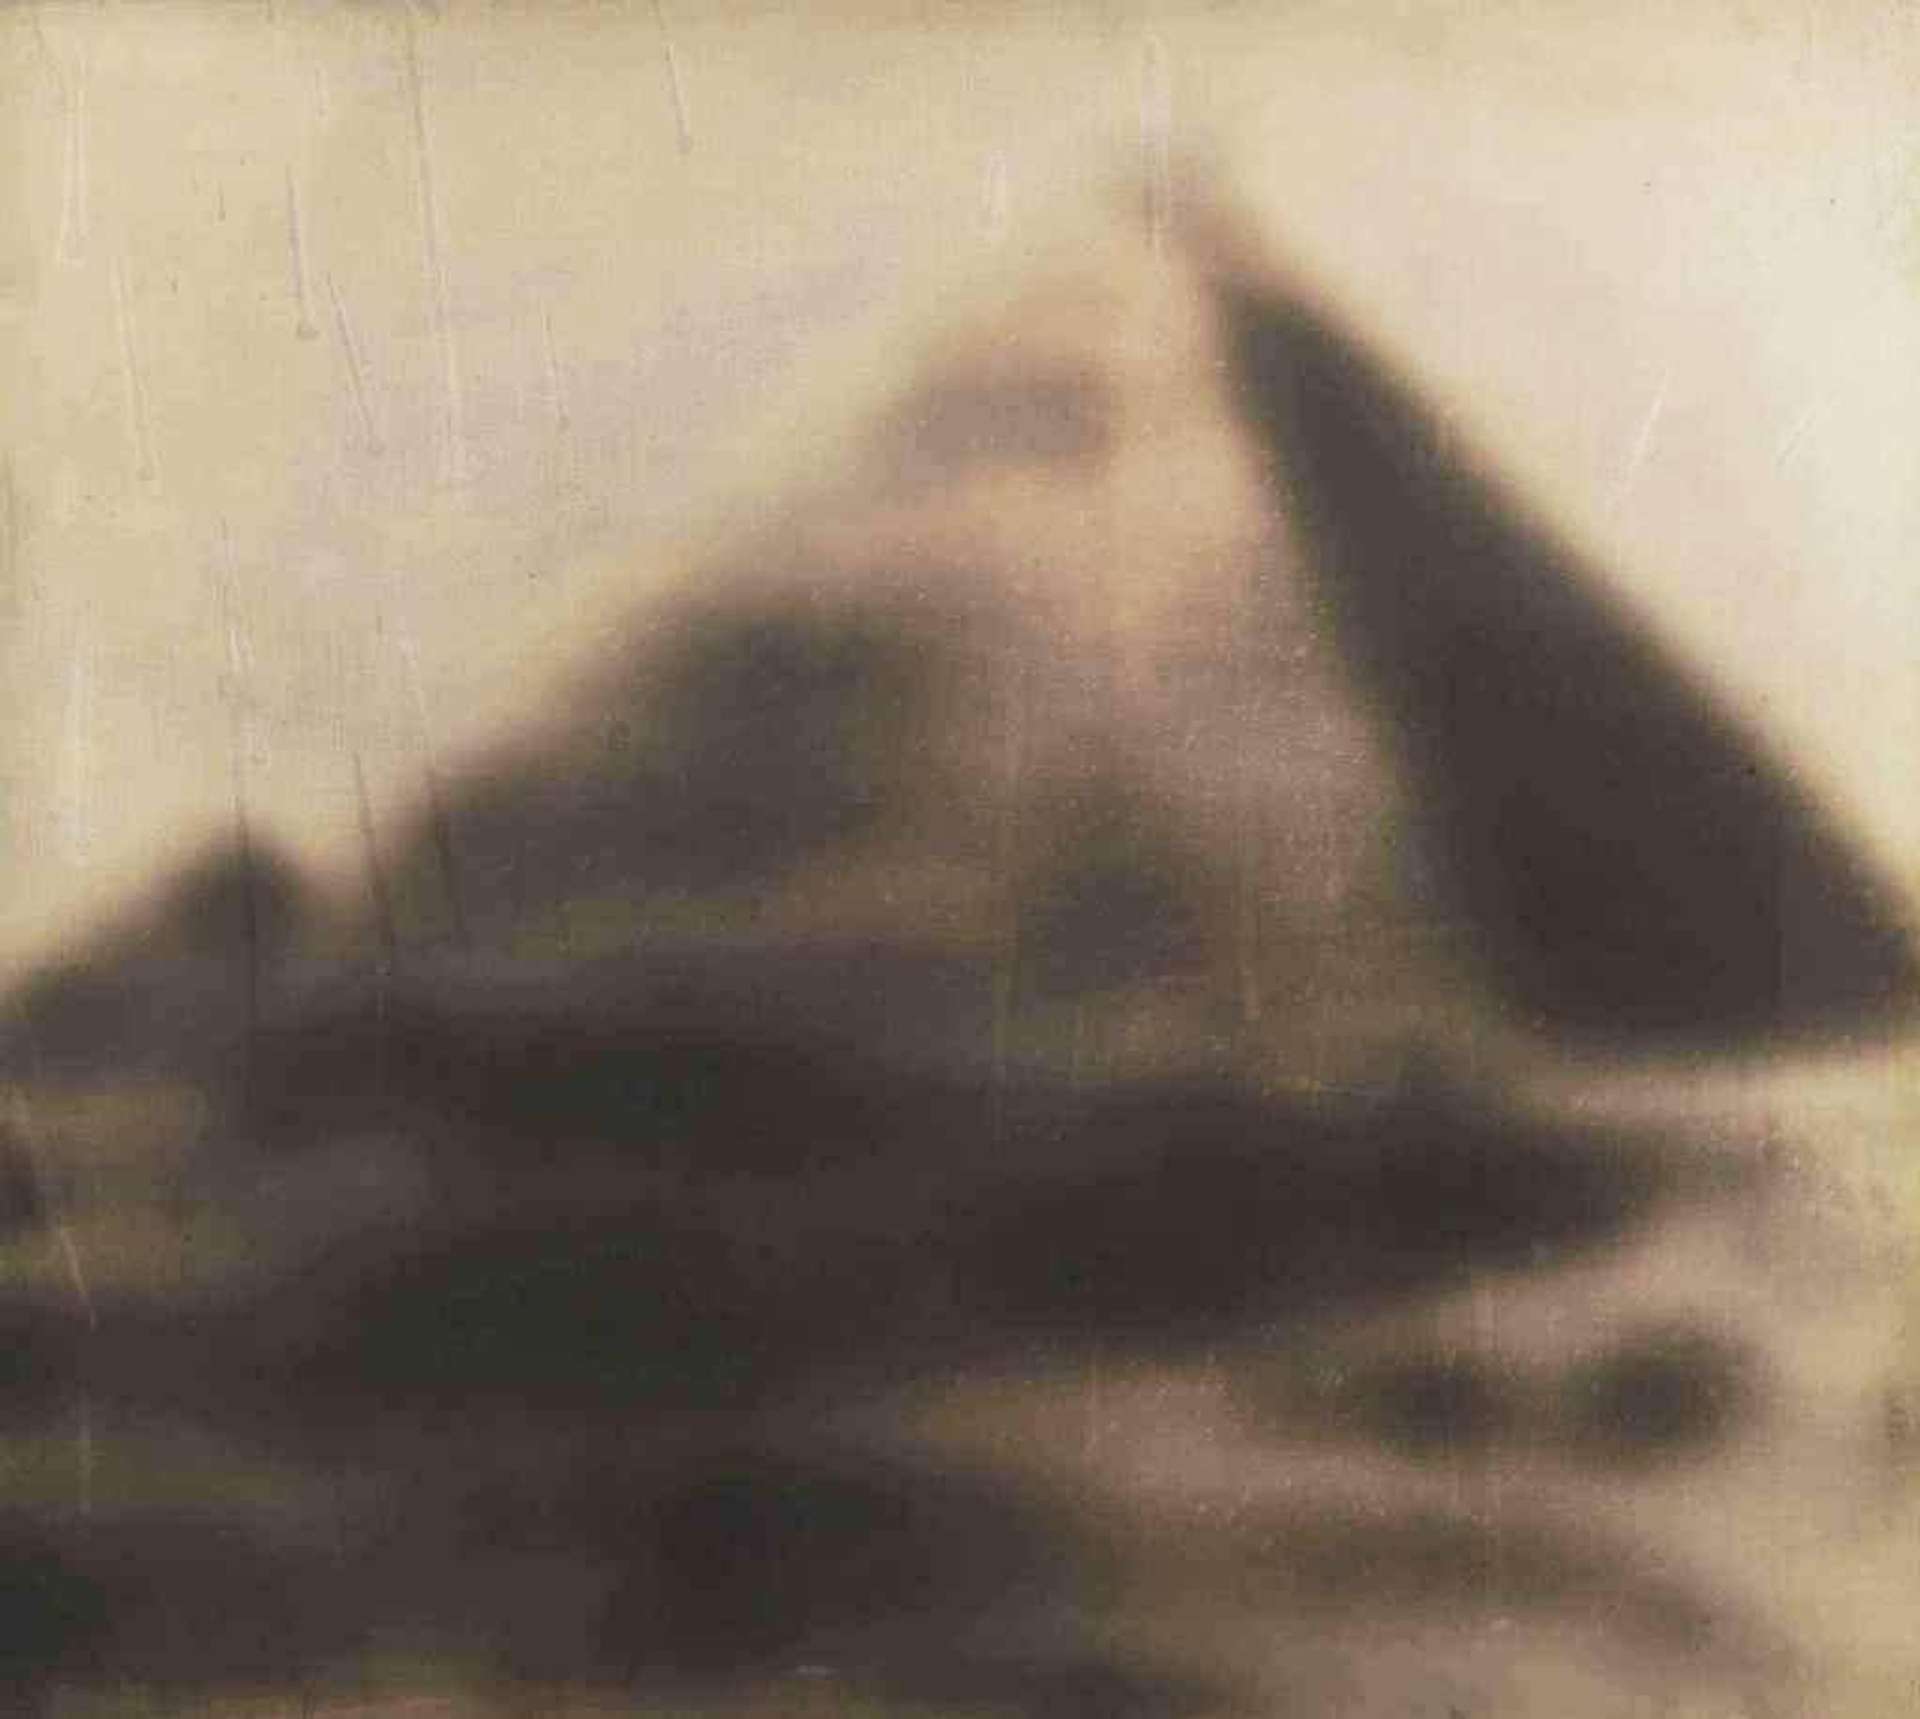 An image of the print Pyramide by Gerhard Richter, showing one of Egypt's pyramids in a stylised manner.